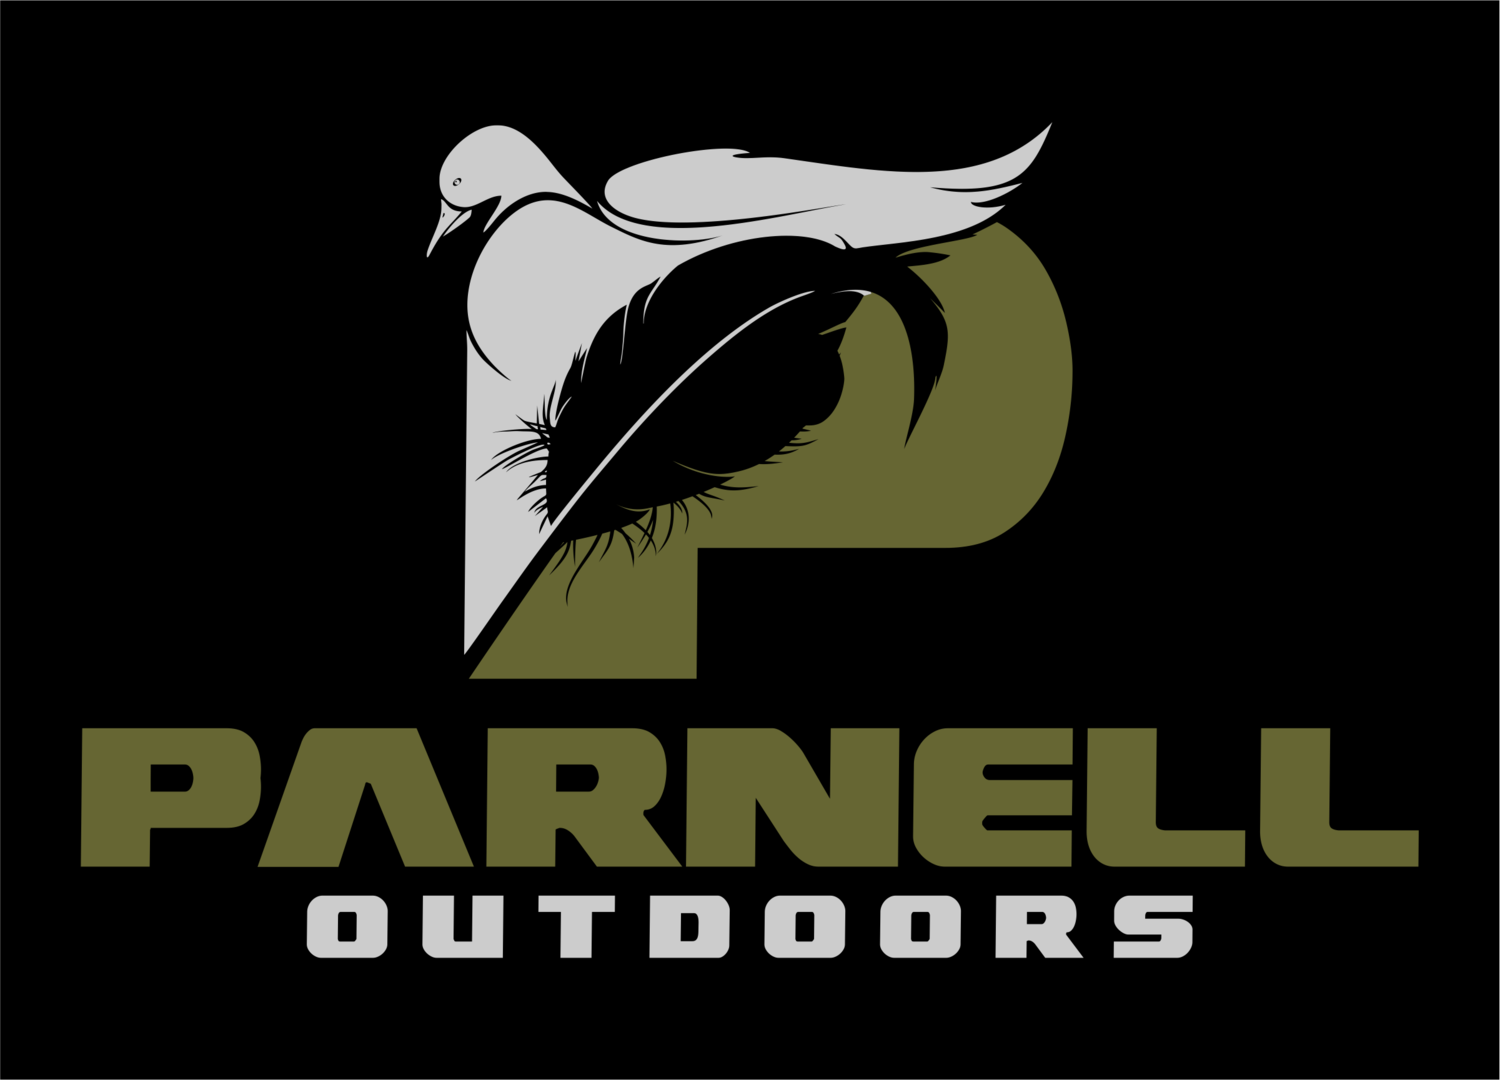 Parnell Outdoors